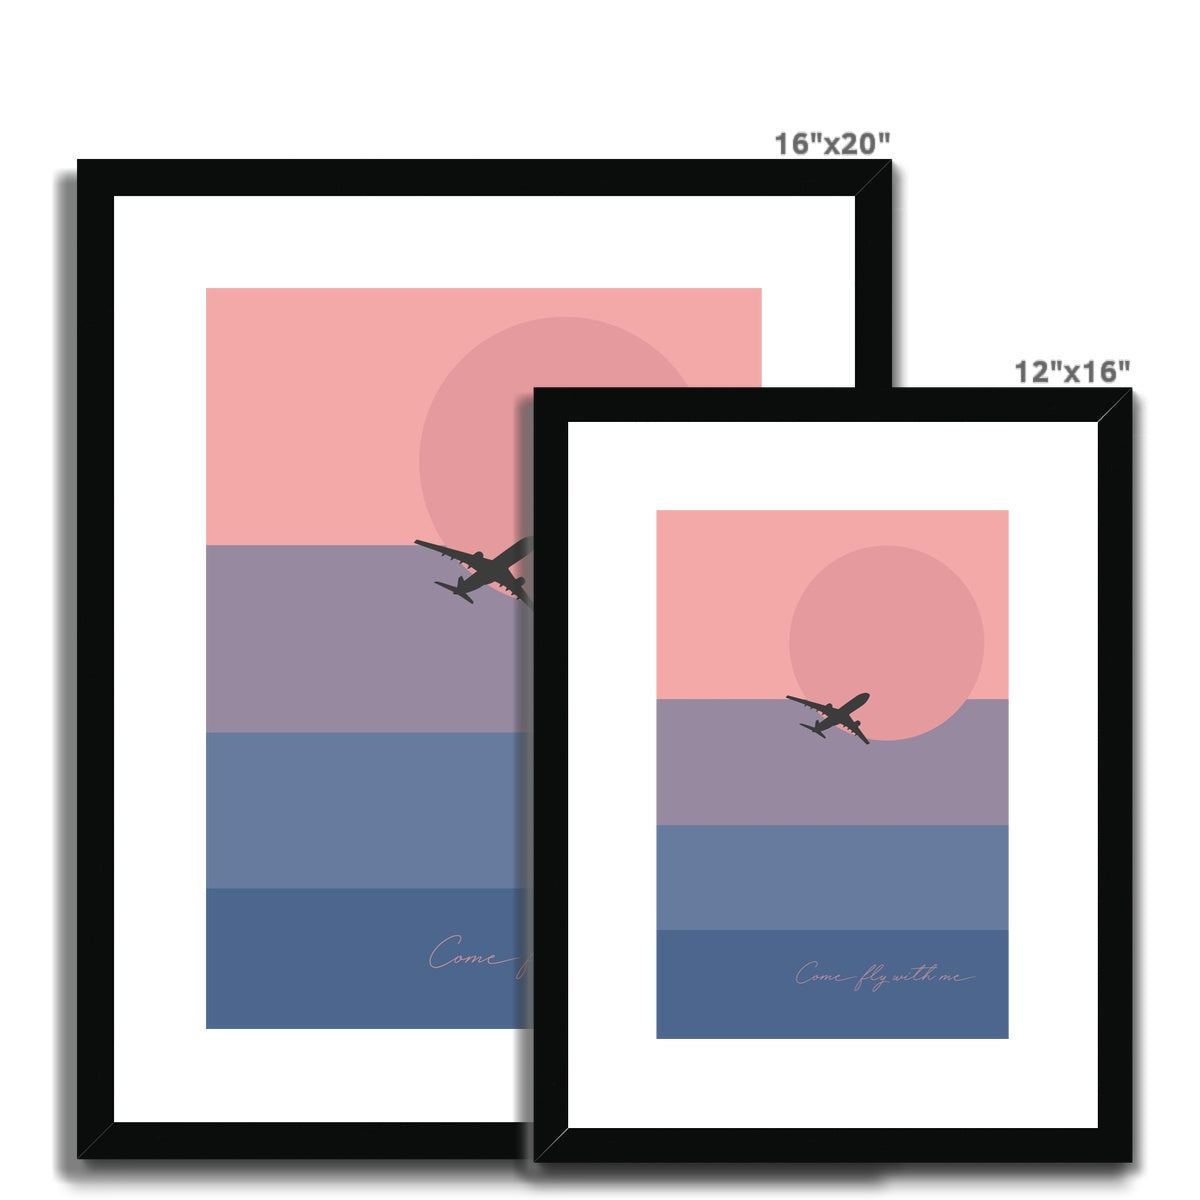 Come Fly With Me Framed & Mounted Print